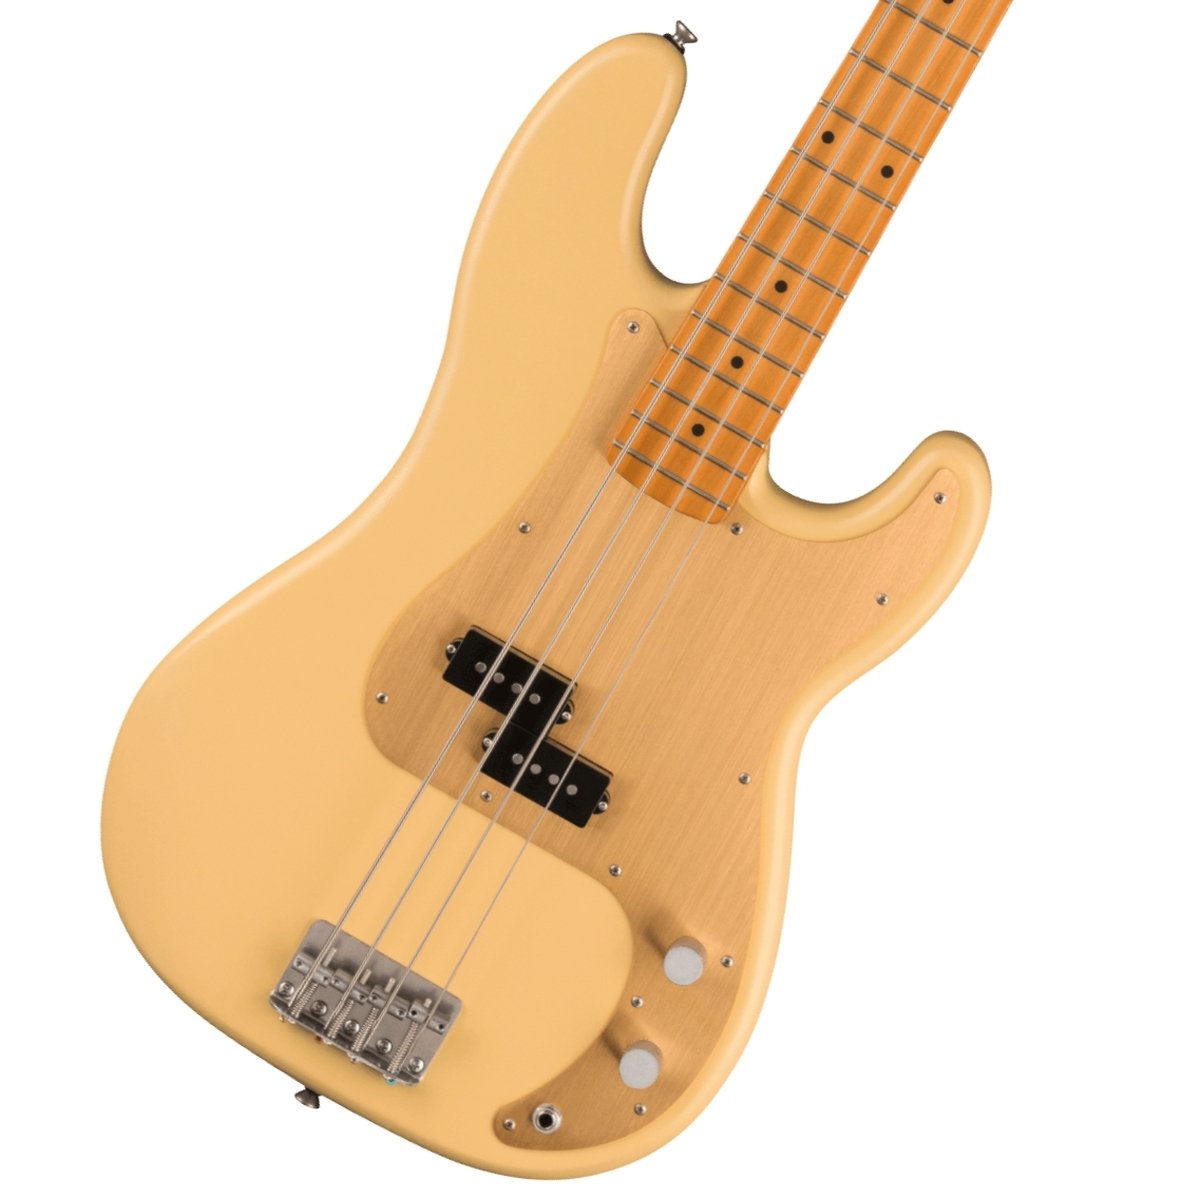 Squier / 40th Anniversary Precision Bass Vintage Edition Maple Fingerboard Gold Anodized Pickguard Satin Vintage Blonde《WEBSHOPクリアランスセール》【池袋店】